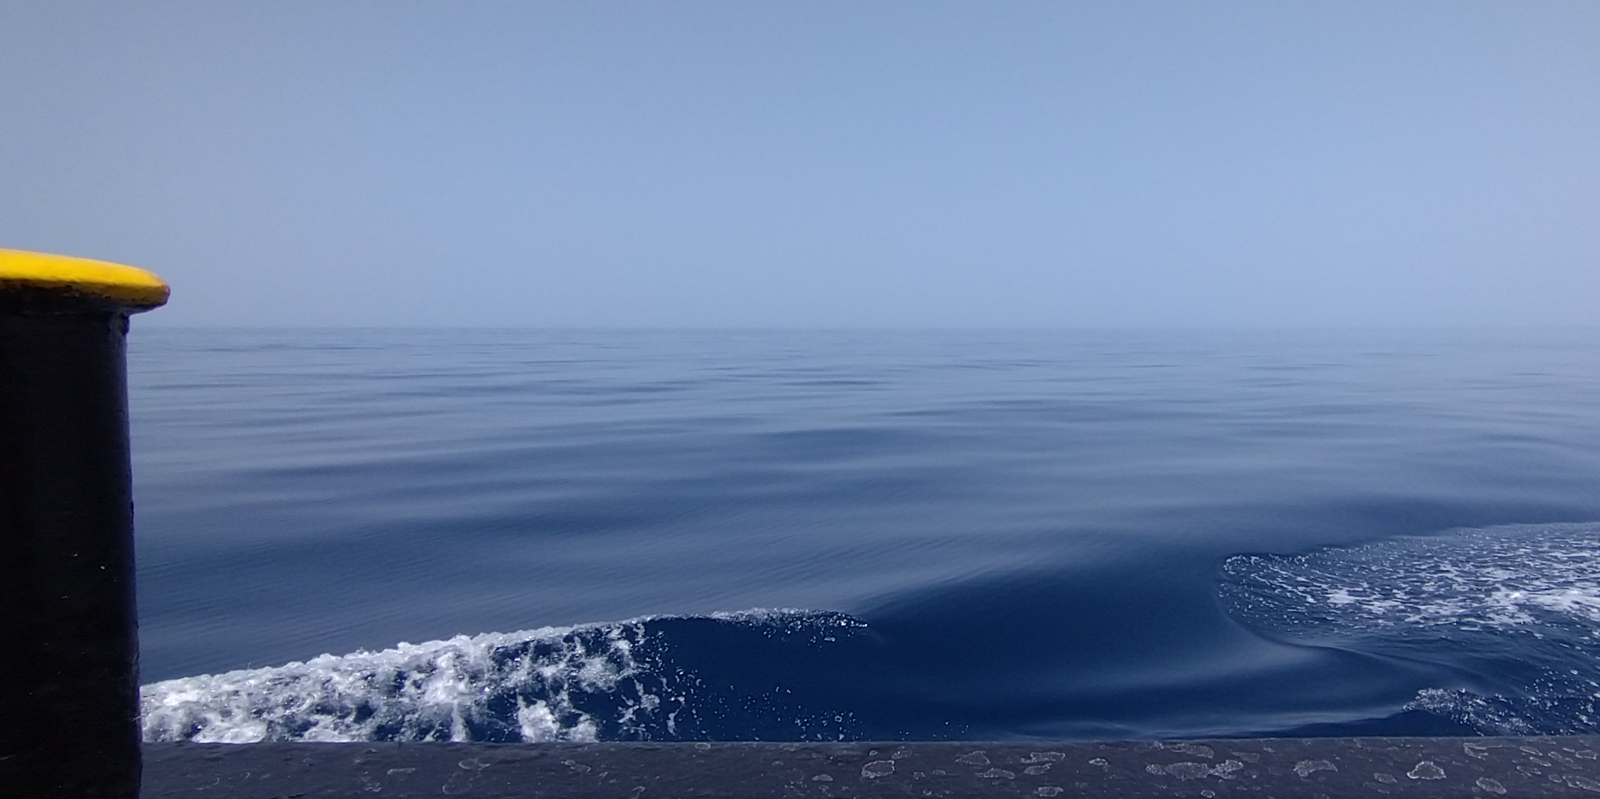 Never before had I seen such a flat ocean surface; as if there is a fat layer of oil keeping the waves down.